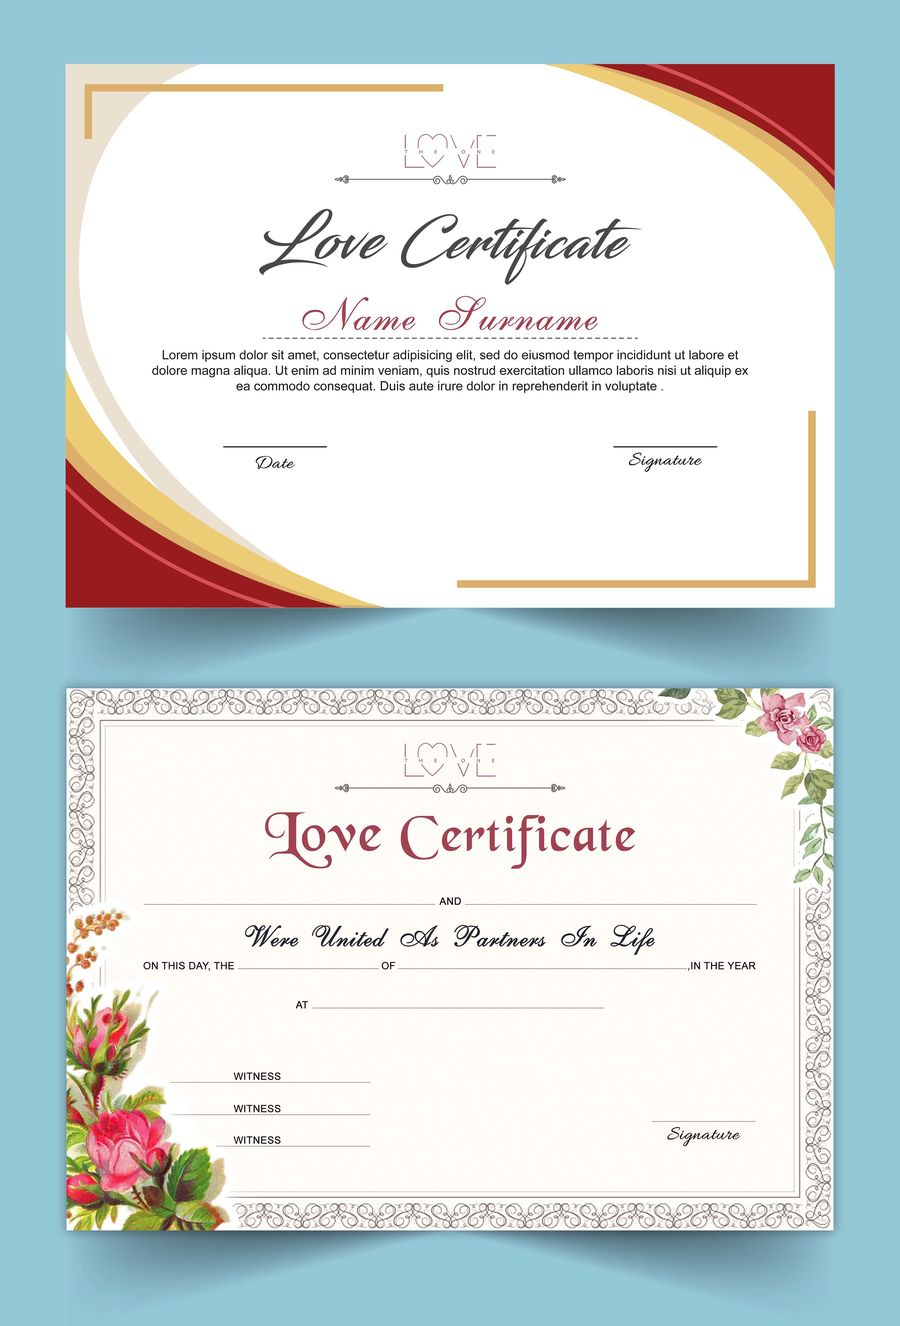 Entry #15Satishandsurabhi For Design A Love Certificate With Regard To Love Certificate Templates